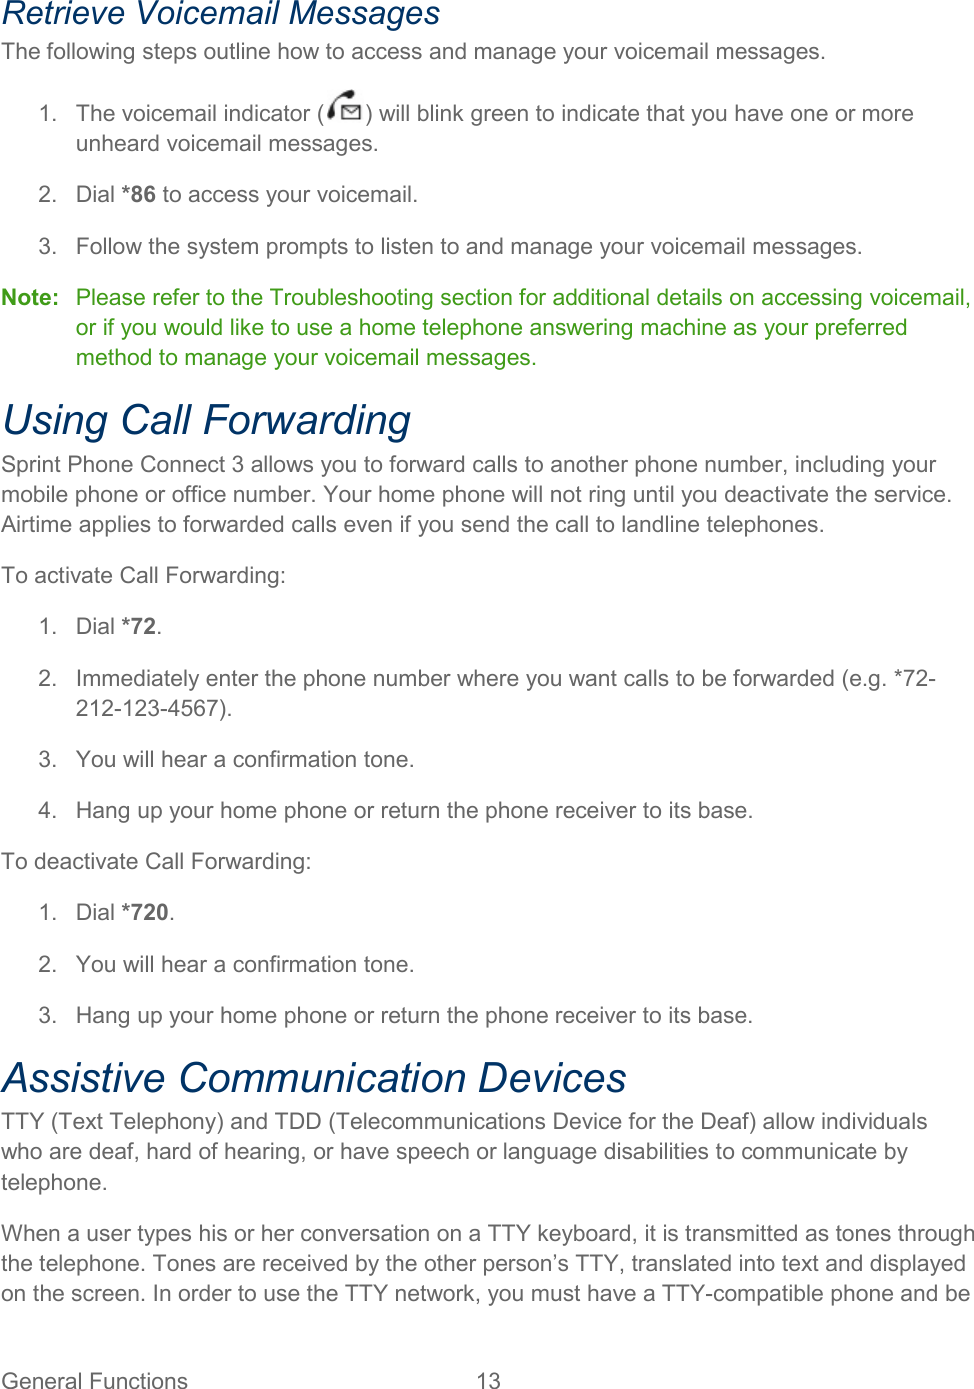 General Functions 13   Retrieve Voicemail Messages The following steps outline how to access and manage your voicemail messages. 1. The voicemail indicator ( ) will blink green to indicate that you have one or more unheard voicemail messages. 2. Dial *86 to access your voicemail. 3. Follow the system prompts to listen to and manage your voicemail messages. Note: Please refer to the Troubleshooting section for additional details on accessing voicemail, or if you would like to use a home telephone answering machine as your preferred method to manage your voicemail messages. Using Call Forwarding Sprint Phone Connect 3 allows you to forward calls to another phone number, including your mobile phone or office number. Your home phone will not ring until you deactivate the service. Airtime applies to forwarded calls even if you send the call to landline telephones. To activate Call Forwarding: 1. Dial *72. 2. Immediately enter the phone number where you want calls to be forwarded (e.g. *72-212-123-4567). 3. You will hear a confirmation tone. 4. Hang up your home phone or return the phone receiver to its base. To deactivate Call Forwarding: 1. Dial *720. 2. You will hear a confirmation tone. 3. Hang up your home phone or return the phone receiver to its base. Assistive Communication Devices TTY (Text Telephony) and TDD (Telecommunications Device for the Deaf) allow individuals who are deaf, hard of hearing, or have speech or language disabilities to communicate by telephone. When a user types his or her conversation on a TTY keyboard, it is transmitted as tones through the telephone. Tones are received by the other person’s TTY, translated into text and displayed on the screen. In order to use the TTY network, you must have a TTY-compatible phone and be 